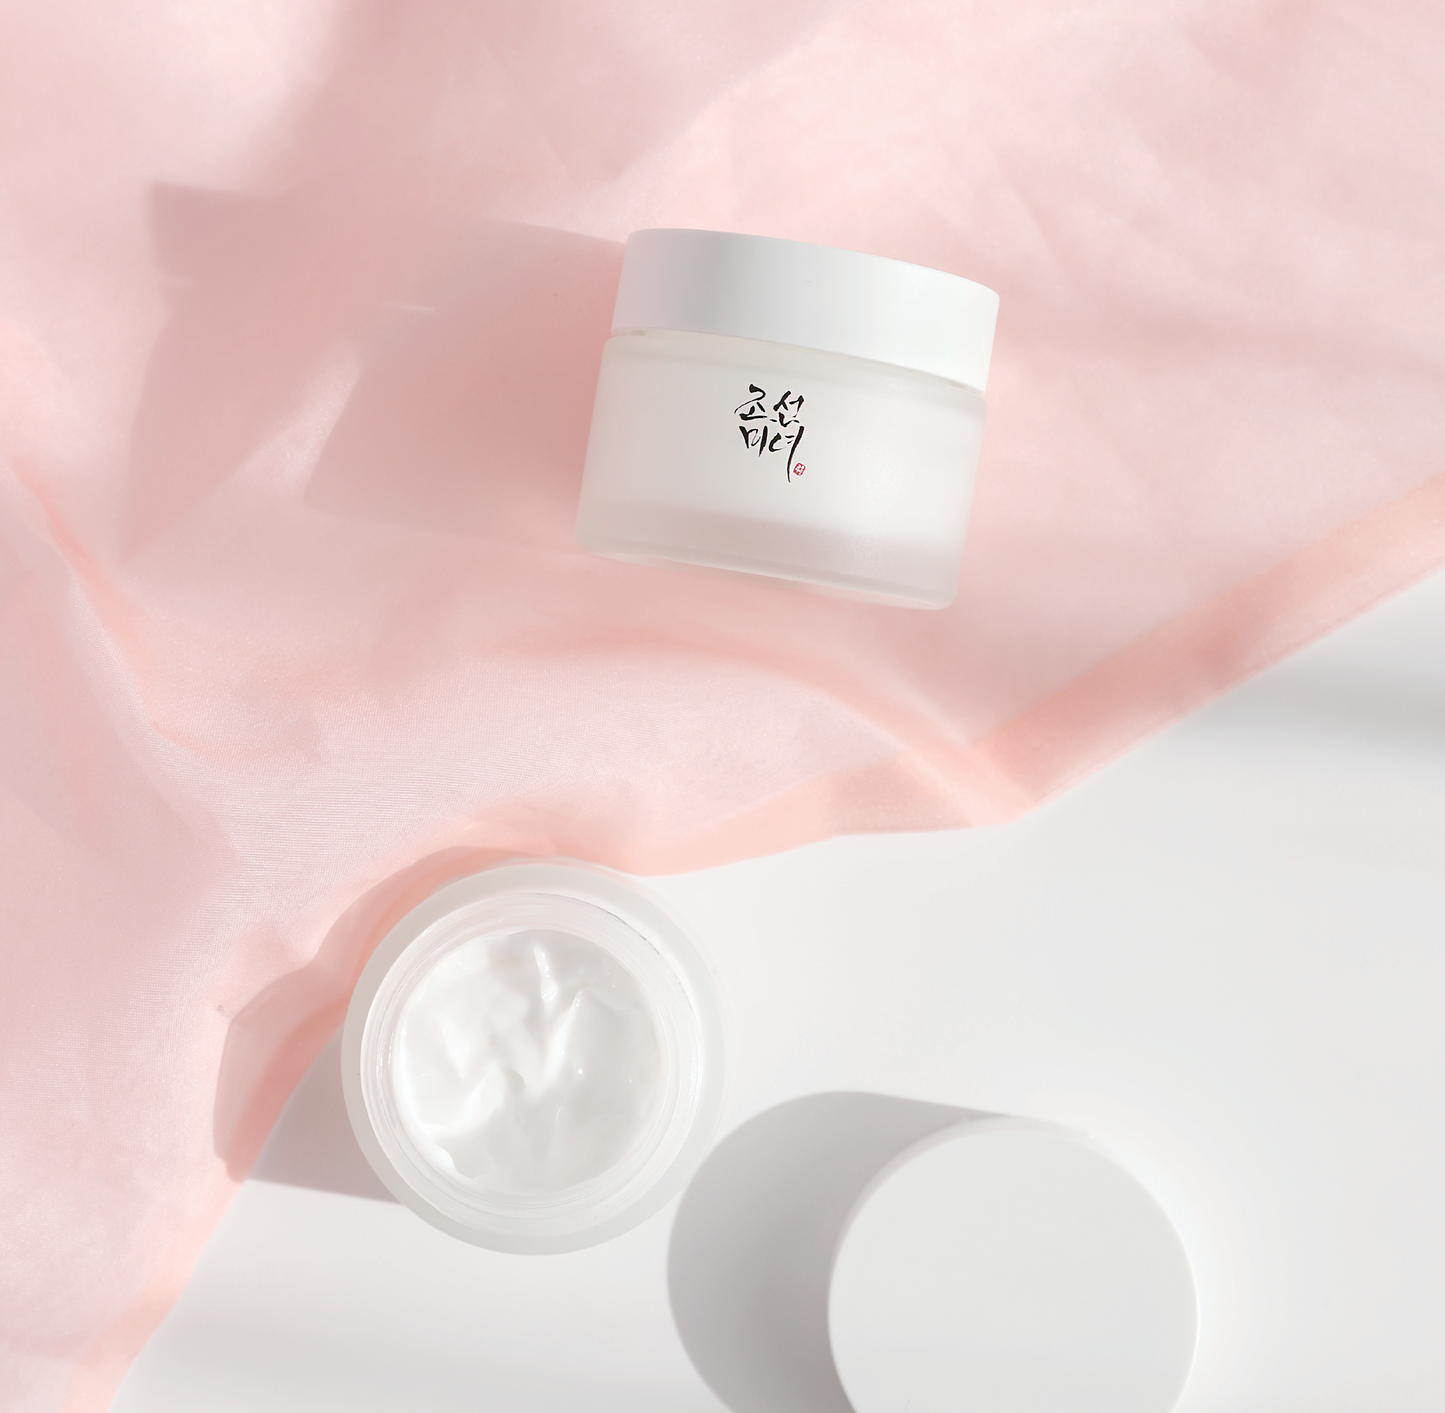 Beauty of Joseon dynasty cream is a popular korean moisturizer. Enriched with Korean ginseng and orchid extract, a creamy moisturizer that improves wrinkles and brighten skin.